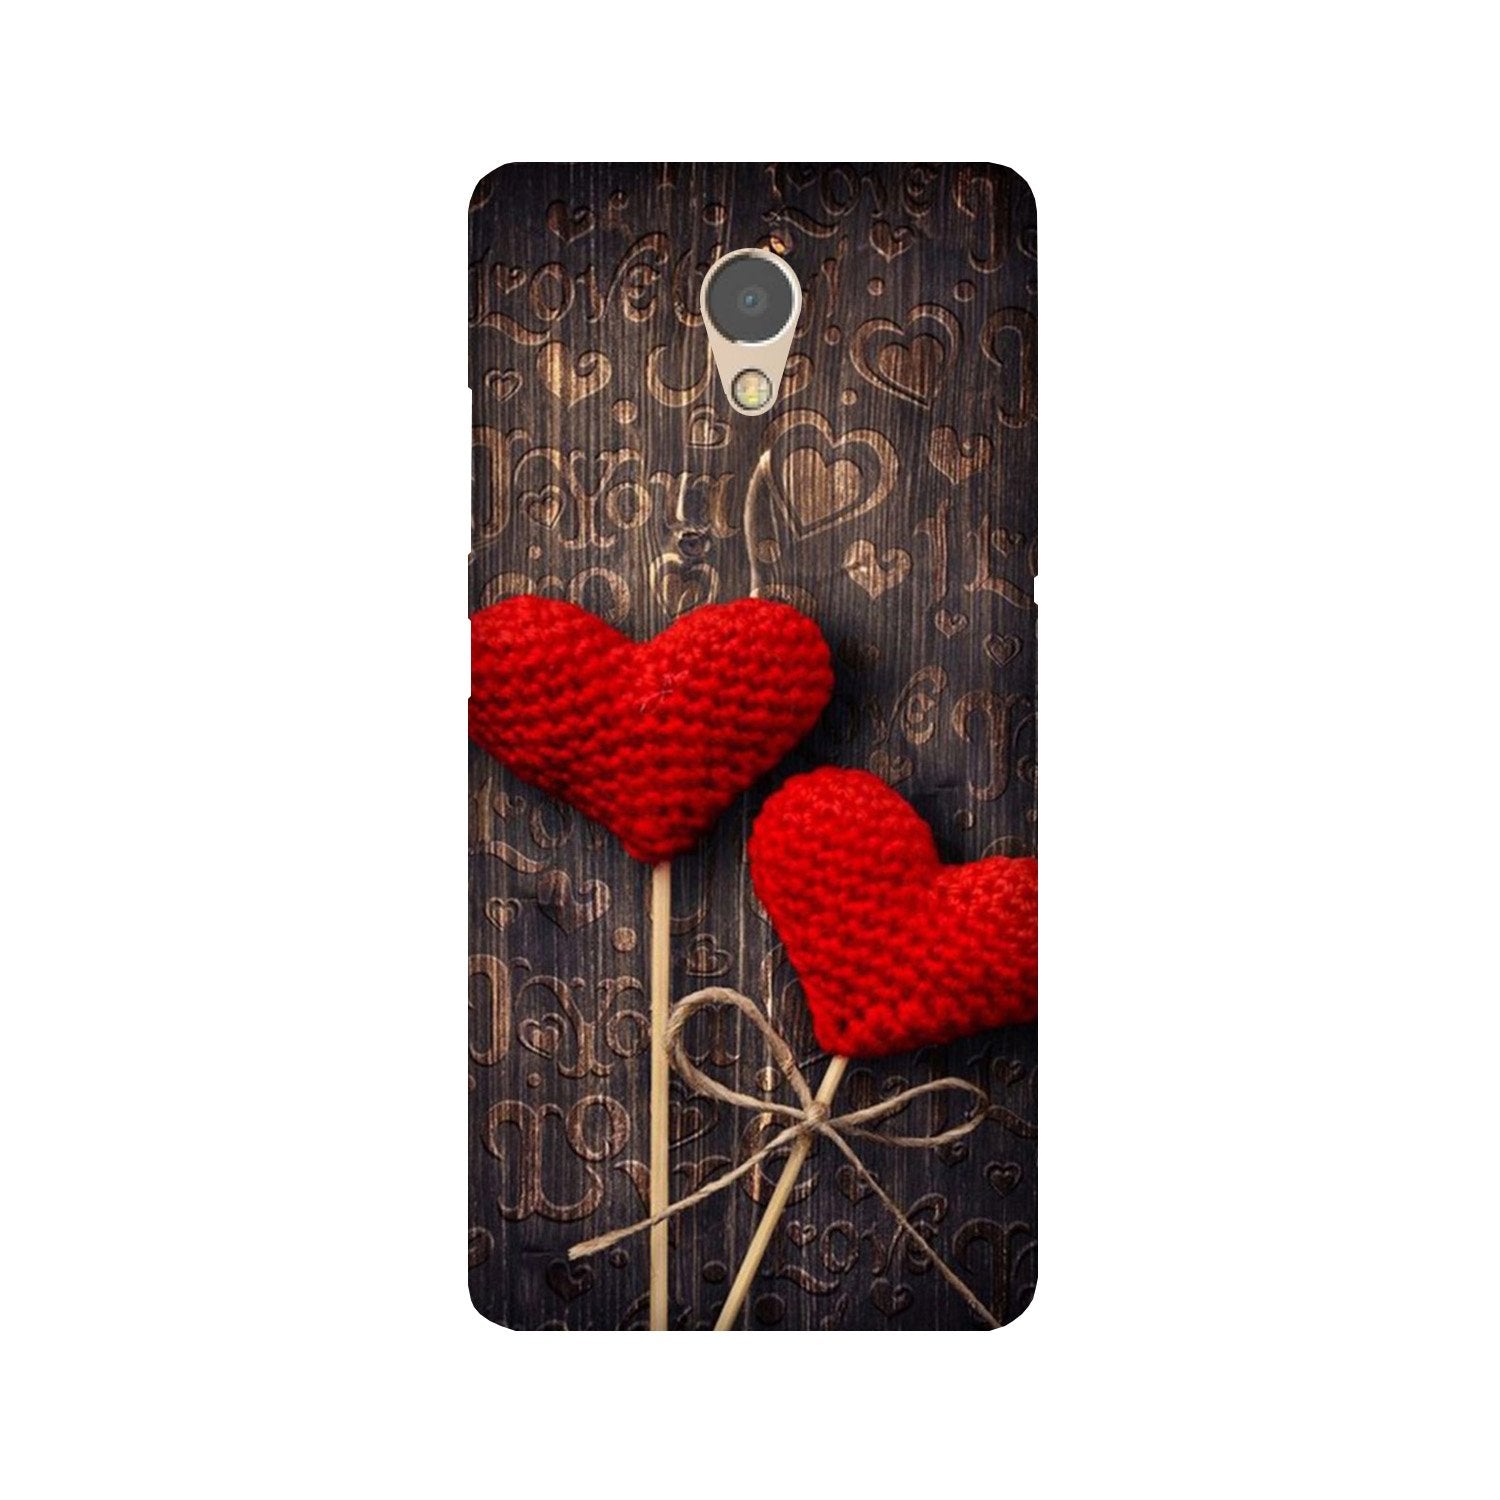 Red Hearts Case for Lenovo P2